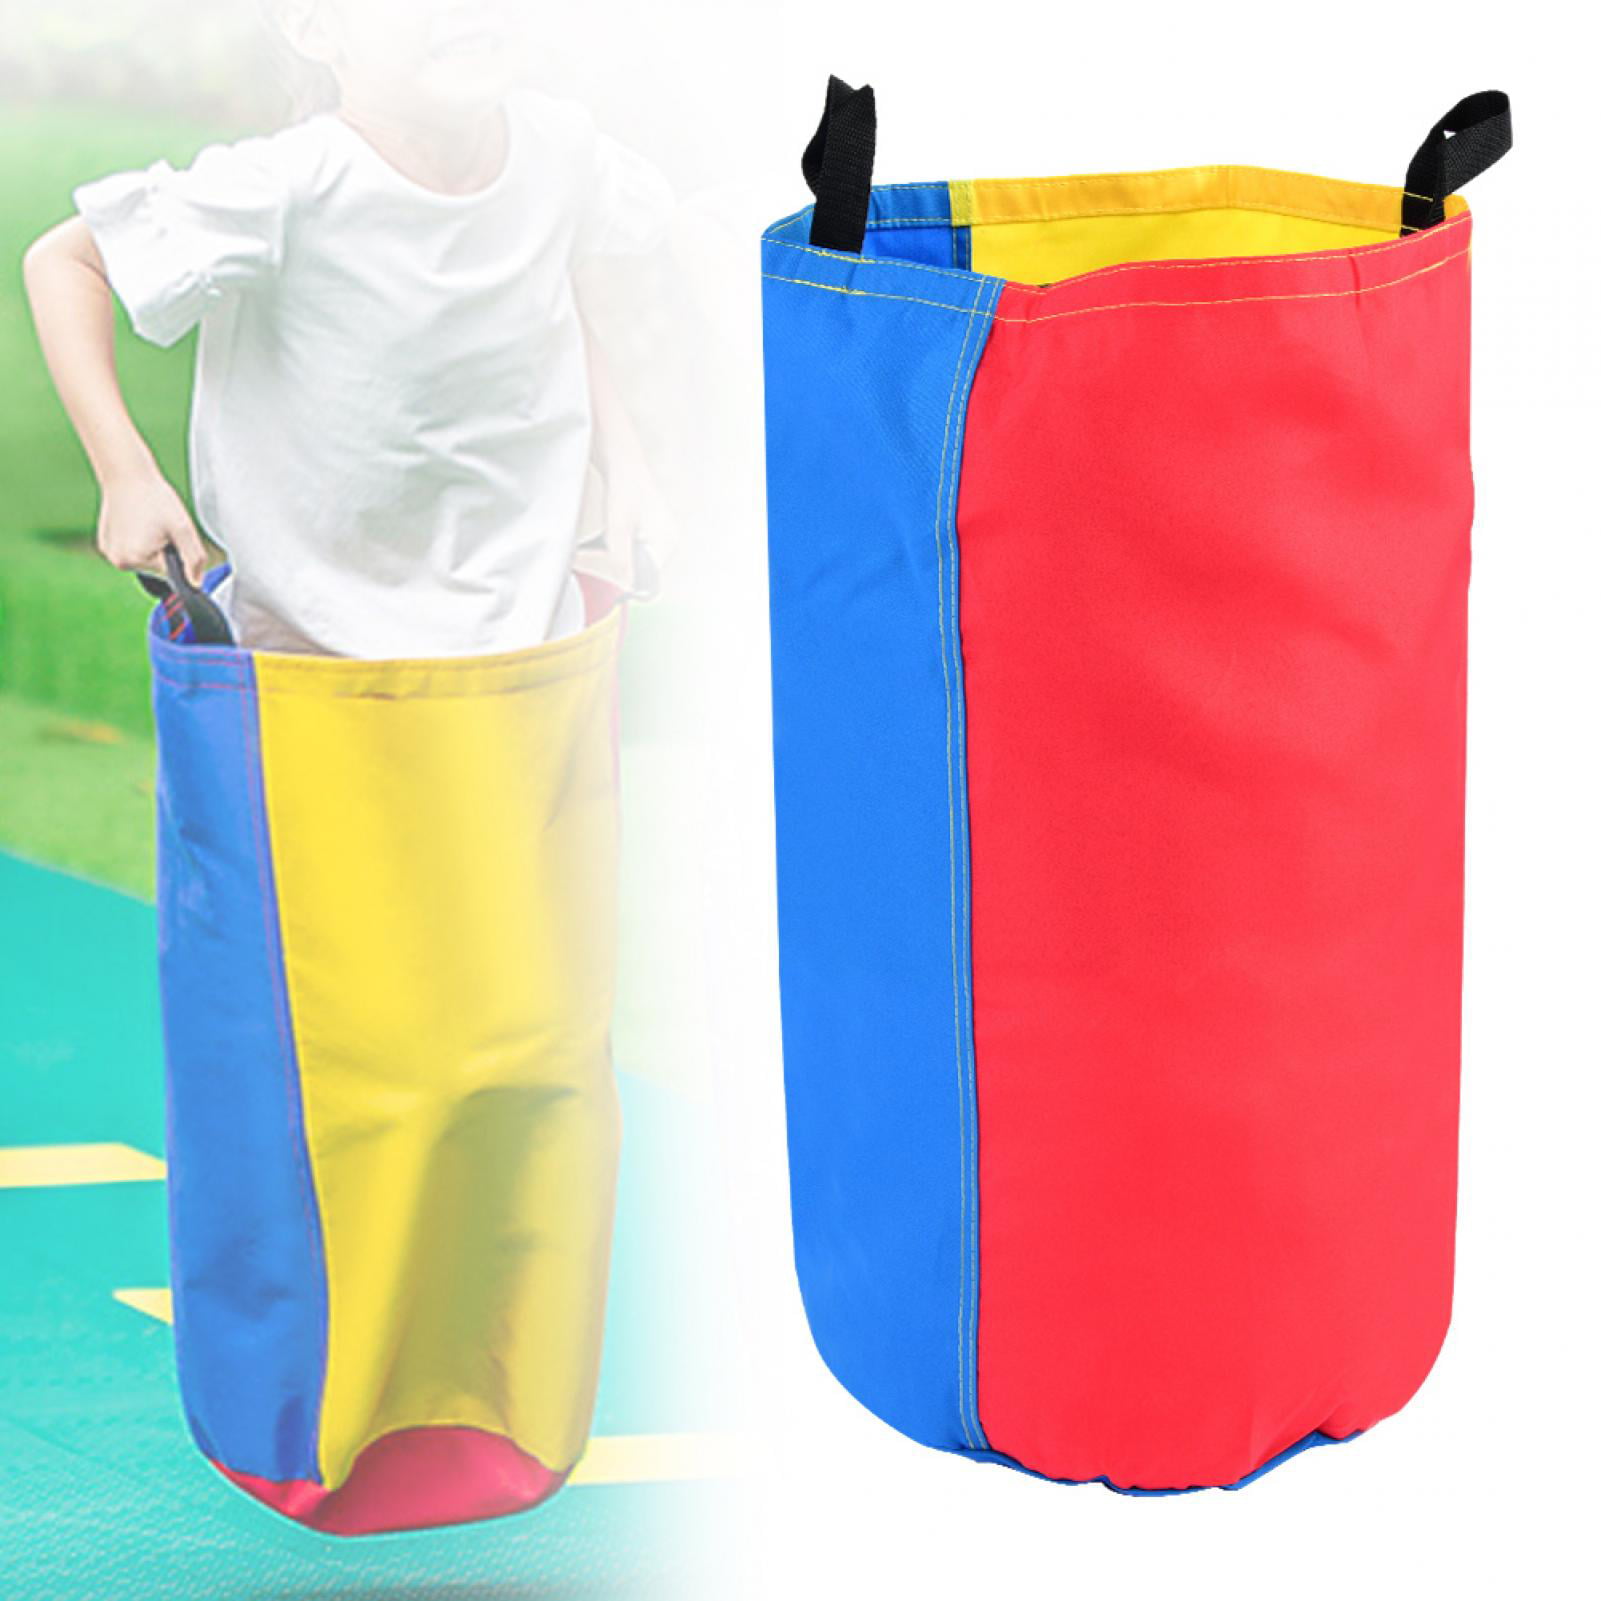 Outdoor Sports Kids Family Games Jumping Sack Toy Race Bag Balance Training Tool 